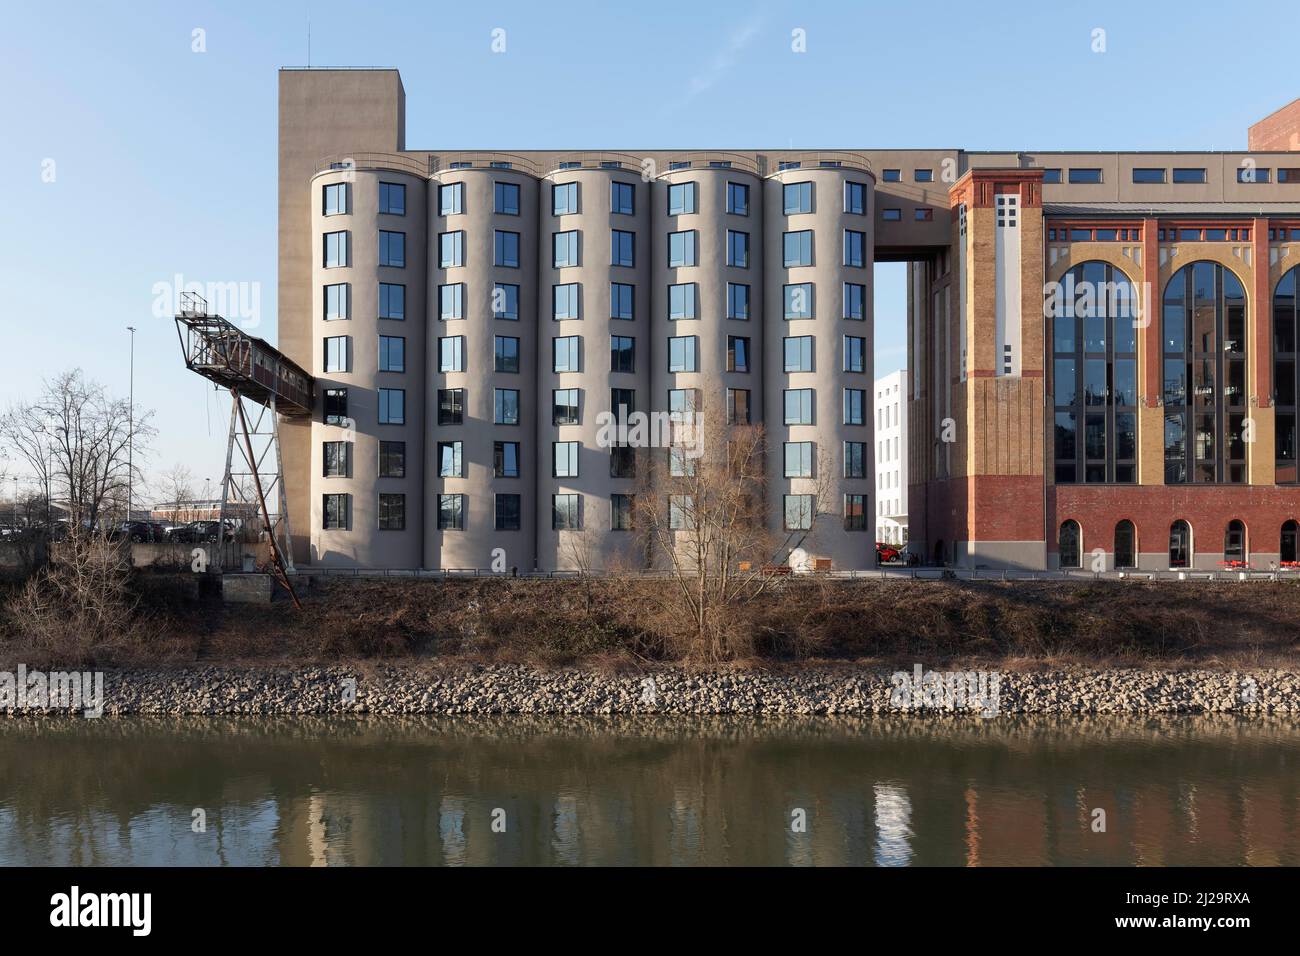 Historic Plange Mill, wheat mill, concrete silos, converted into offices, Duesseldorf Media Harbour, Duesseldorf, North Rhine-Westphalia, Germany Stock Photo